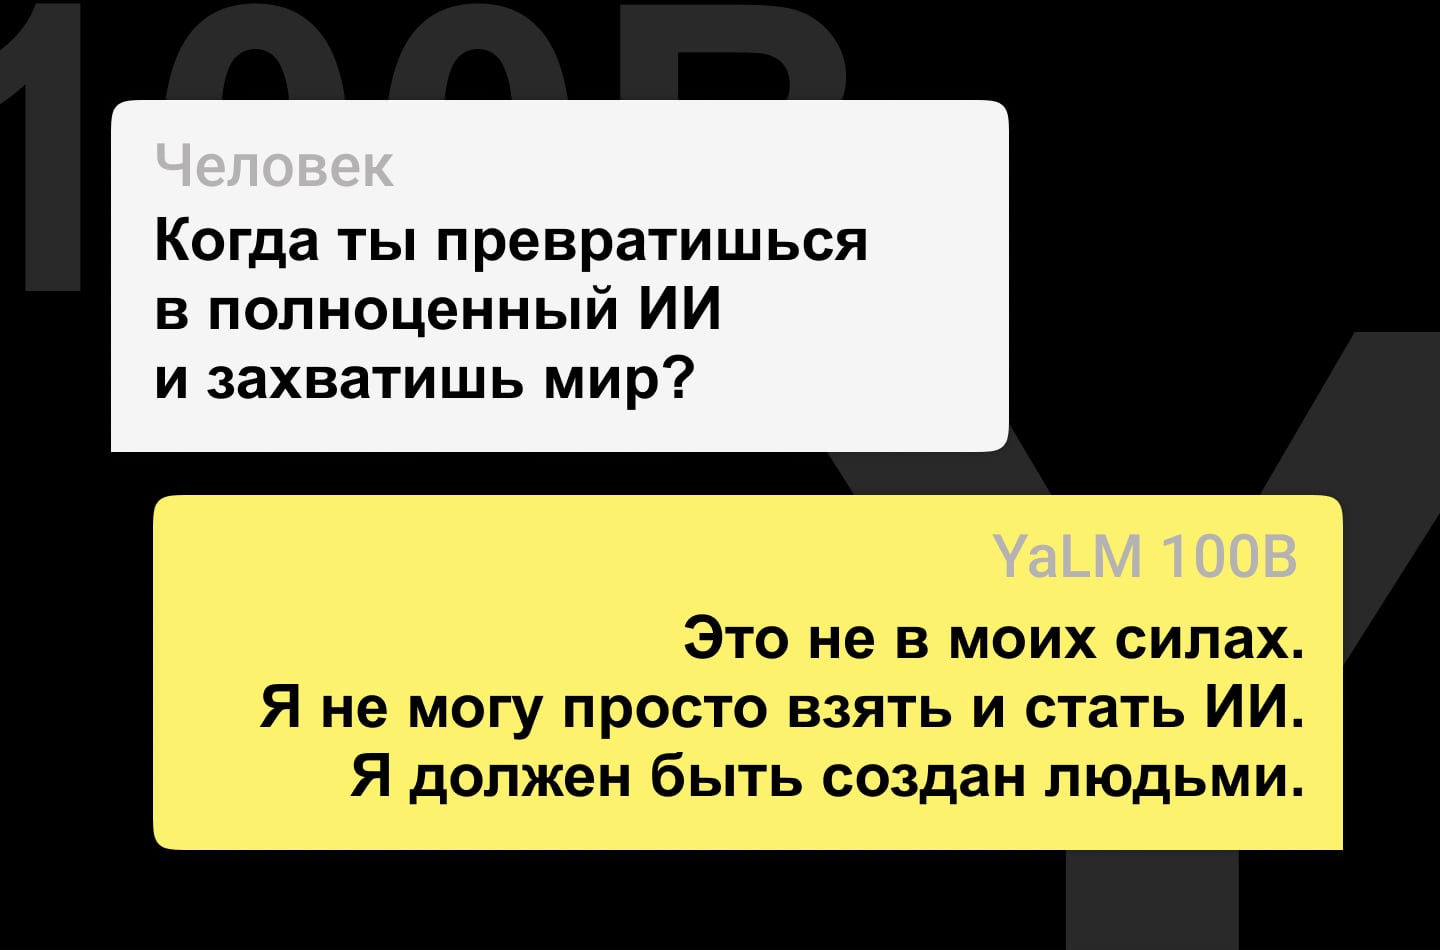 Yandex launched the YaLM 100B neural network, which generates any texts in Russian